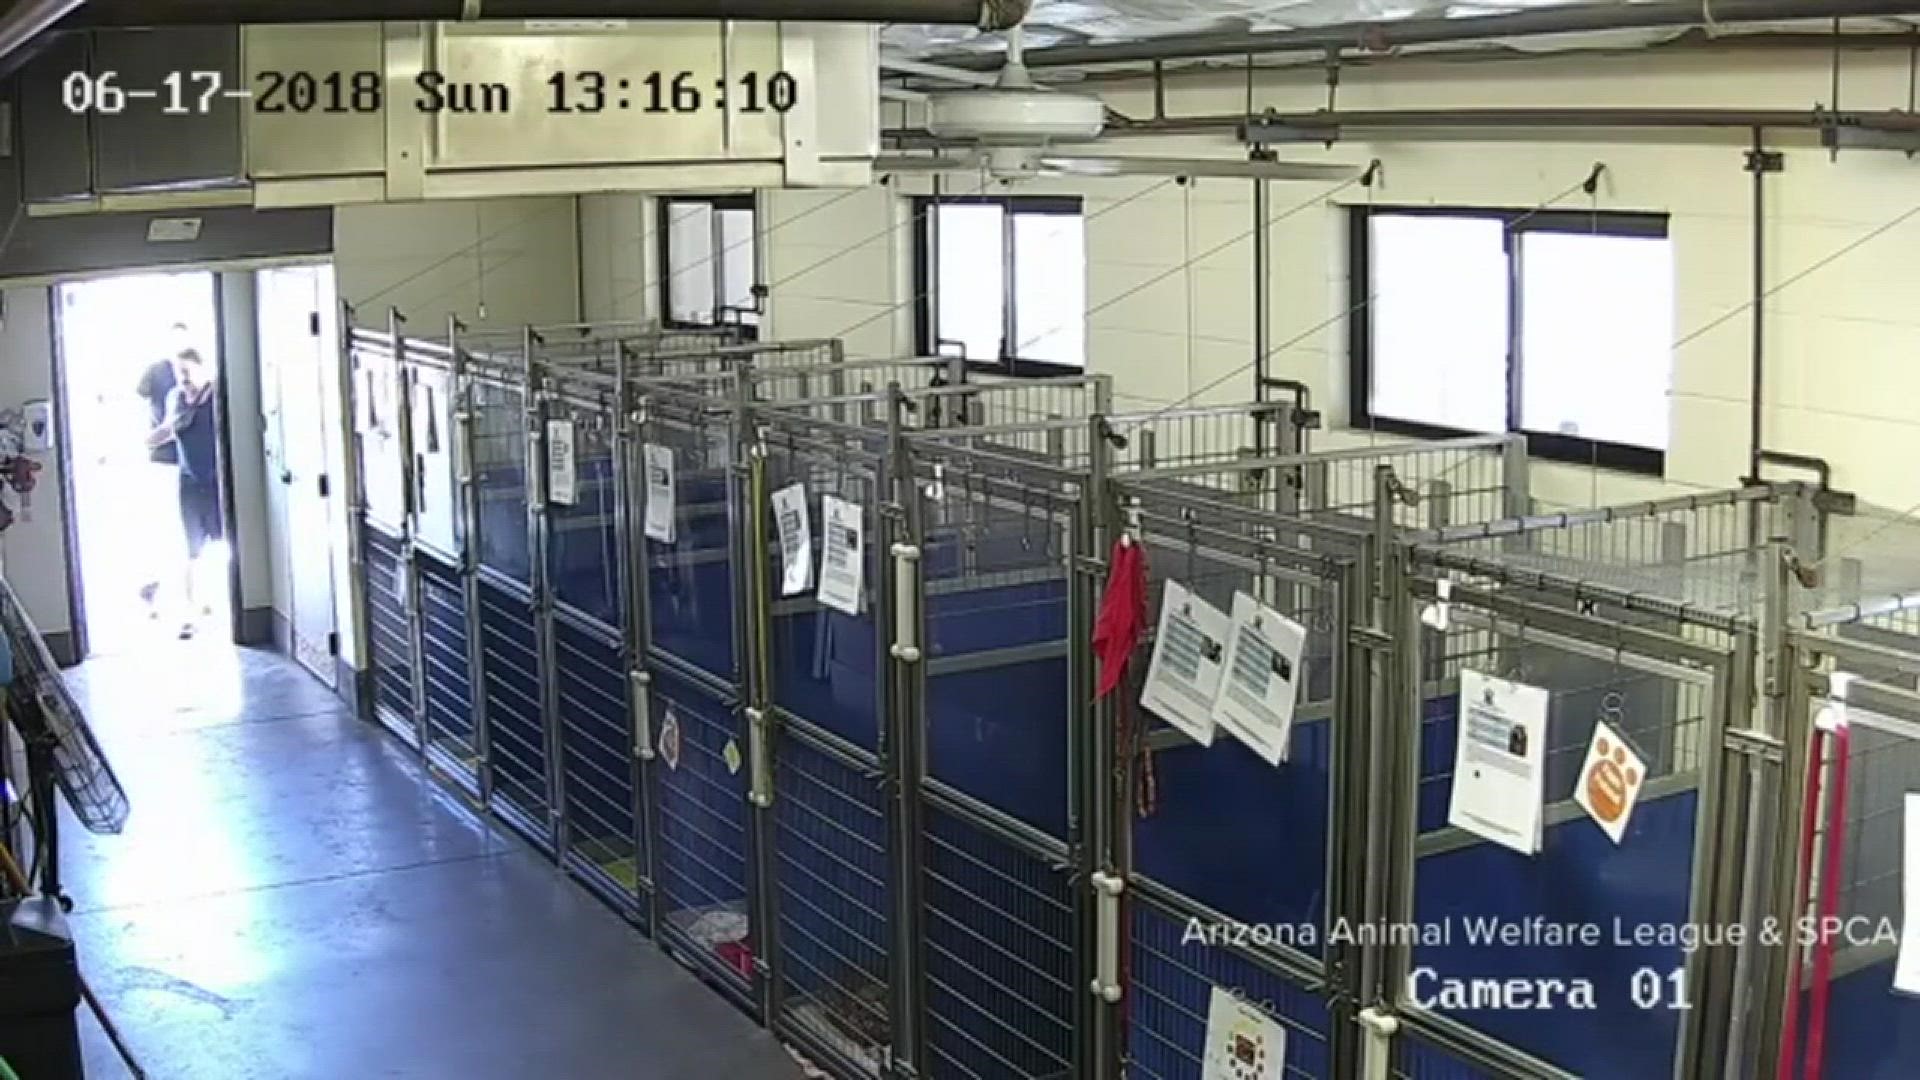 Arizona Animal Welfare League says surveillance footage caught two men stealing a puppy from their facility Sunday afternoon.